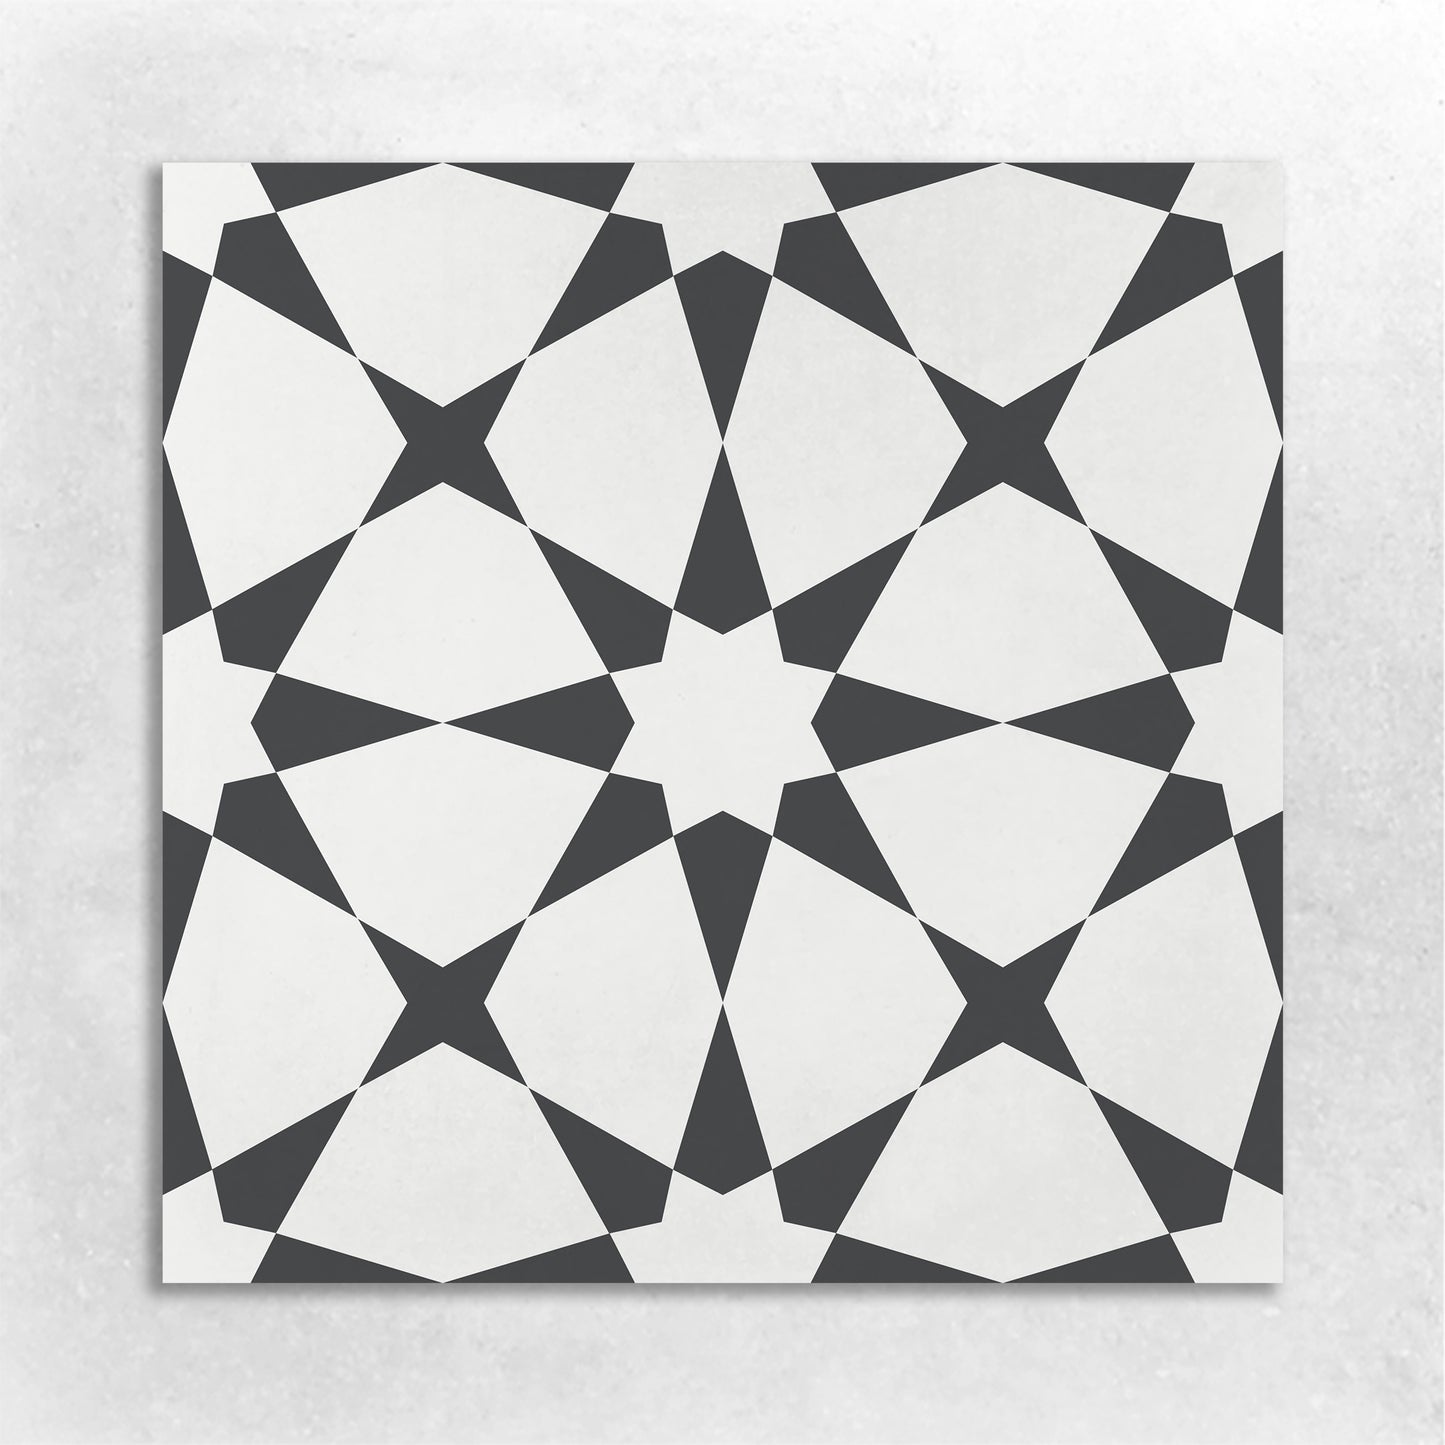 8x8 cement tile with a Moroccan star pattern in white and black colors